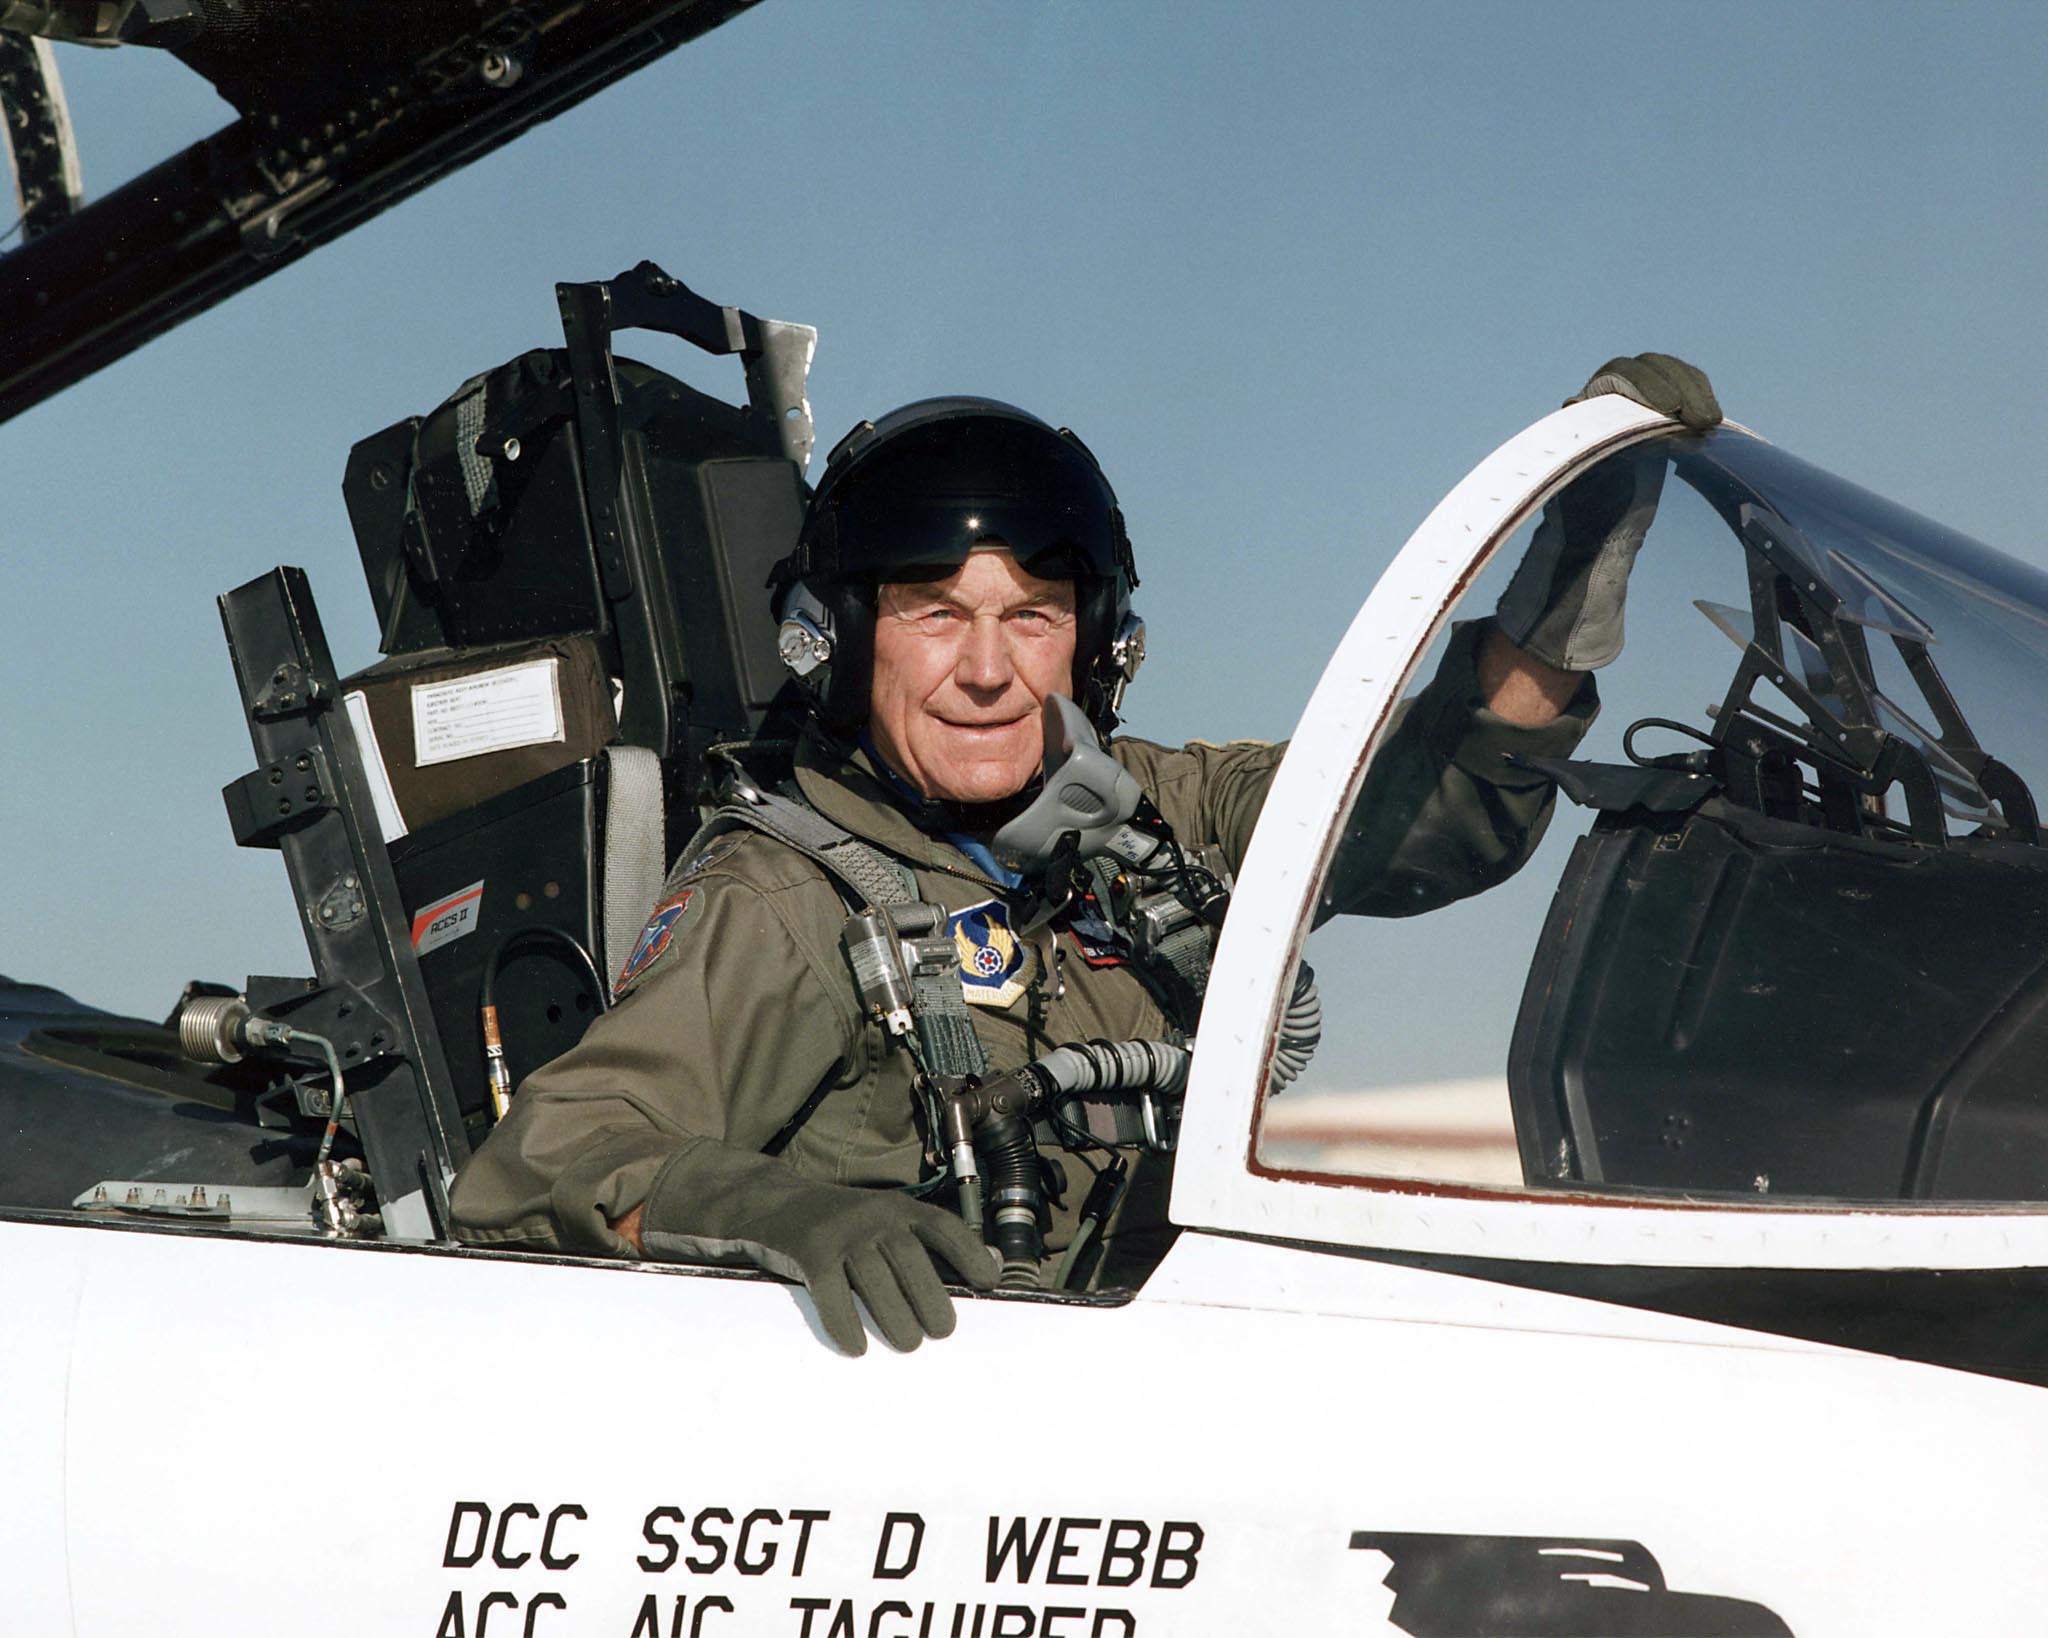 File image: Charles E. "Chuck" Yeager in the cockpit of an F-15 fighter aircraft at US air force base in California